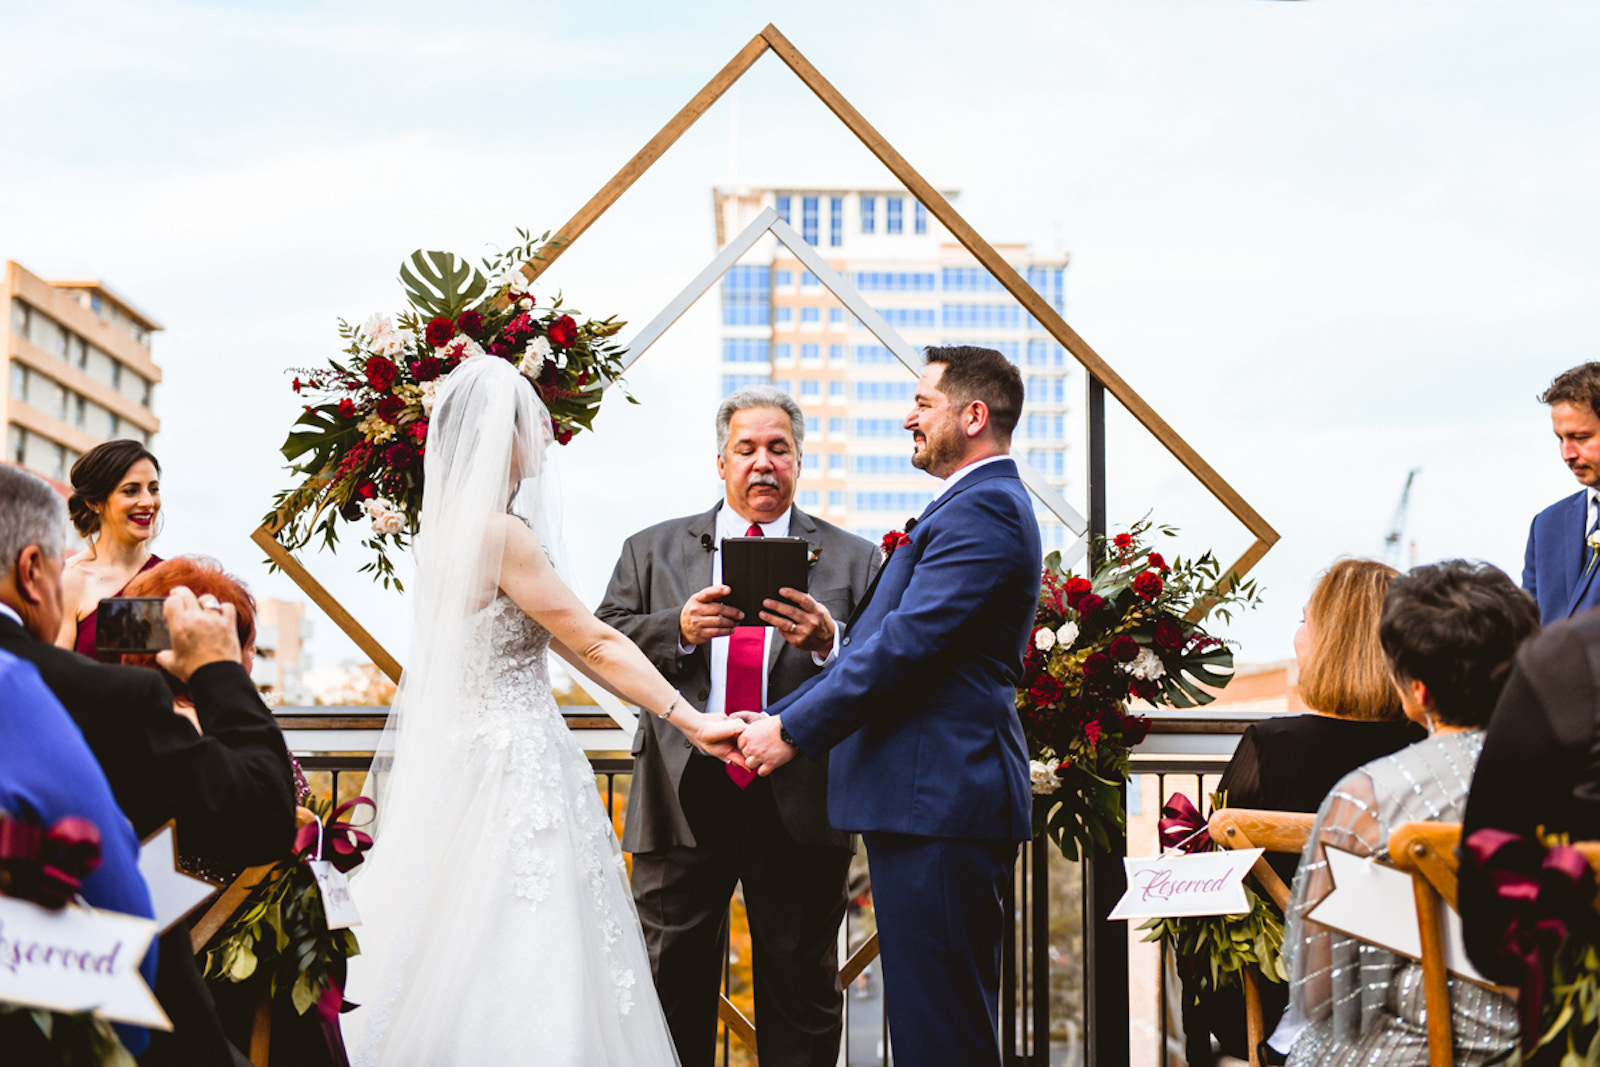 Bride and Groom Exchanging Wedding Vows During Rooftop Ceremony in Front of Geometric Sculpture | Tampa Bay Wedding Planner Special Moments Event Planning | Downtown St. Pete Wedding Venue Red Mesa Events